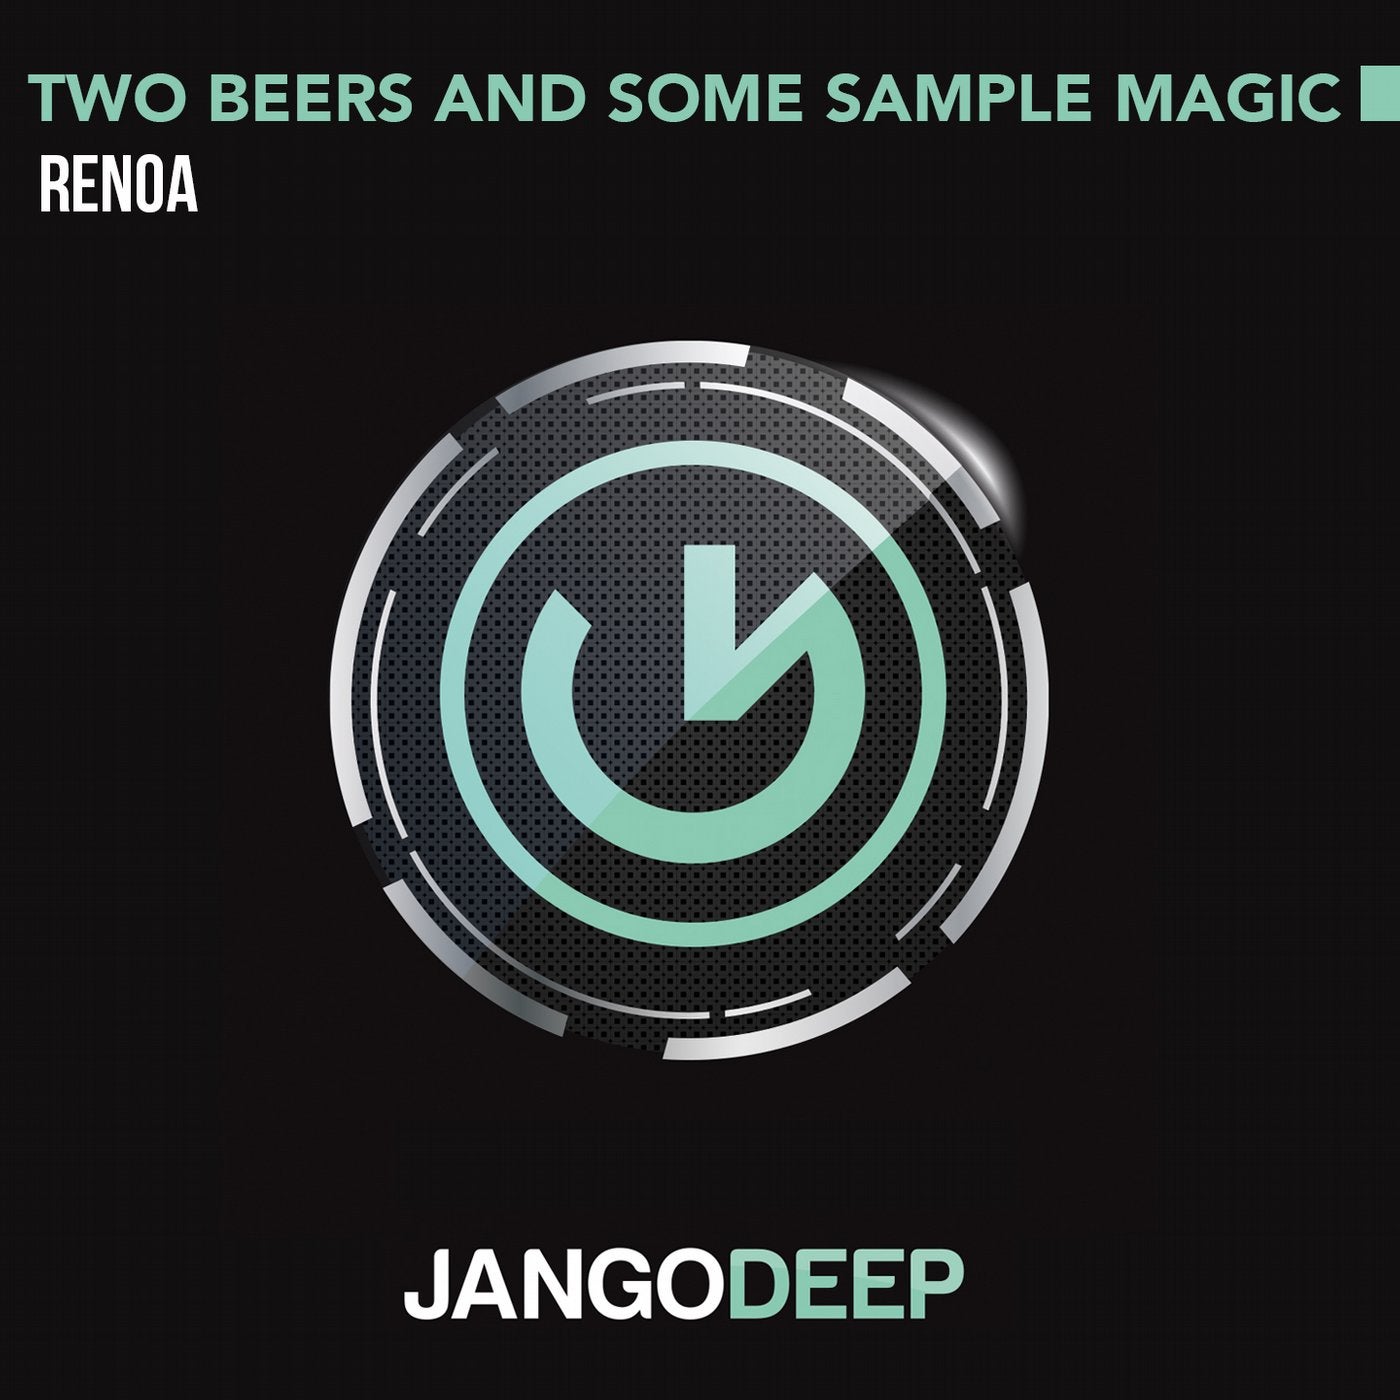 Two Beers and Some Sample Magic